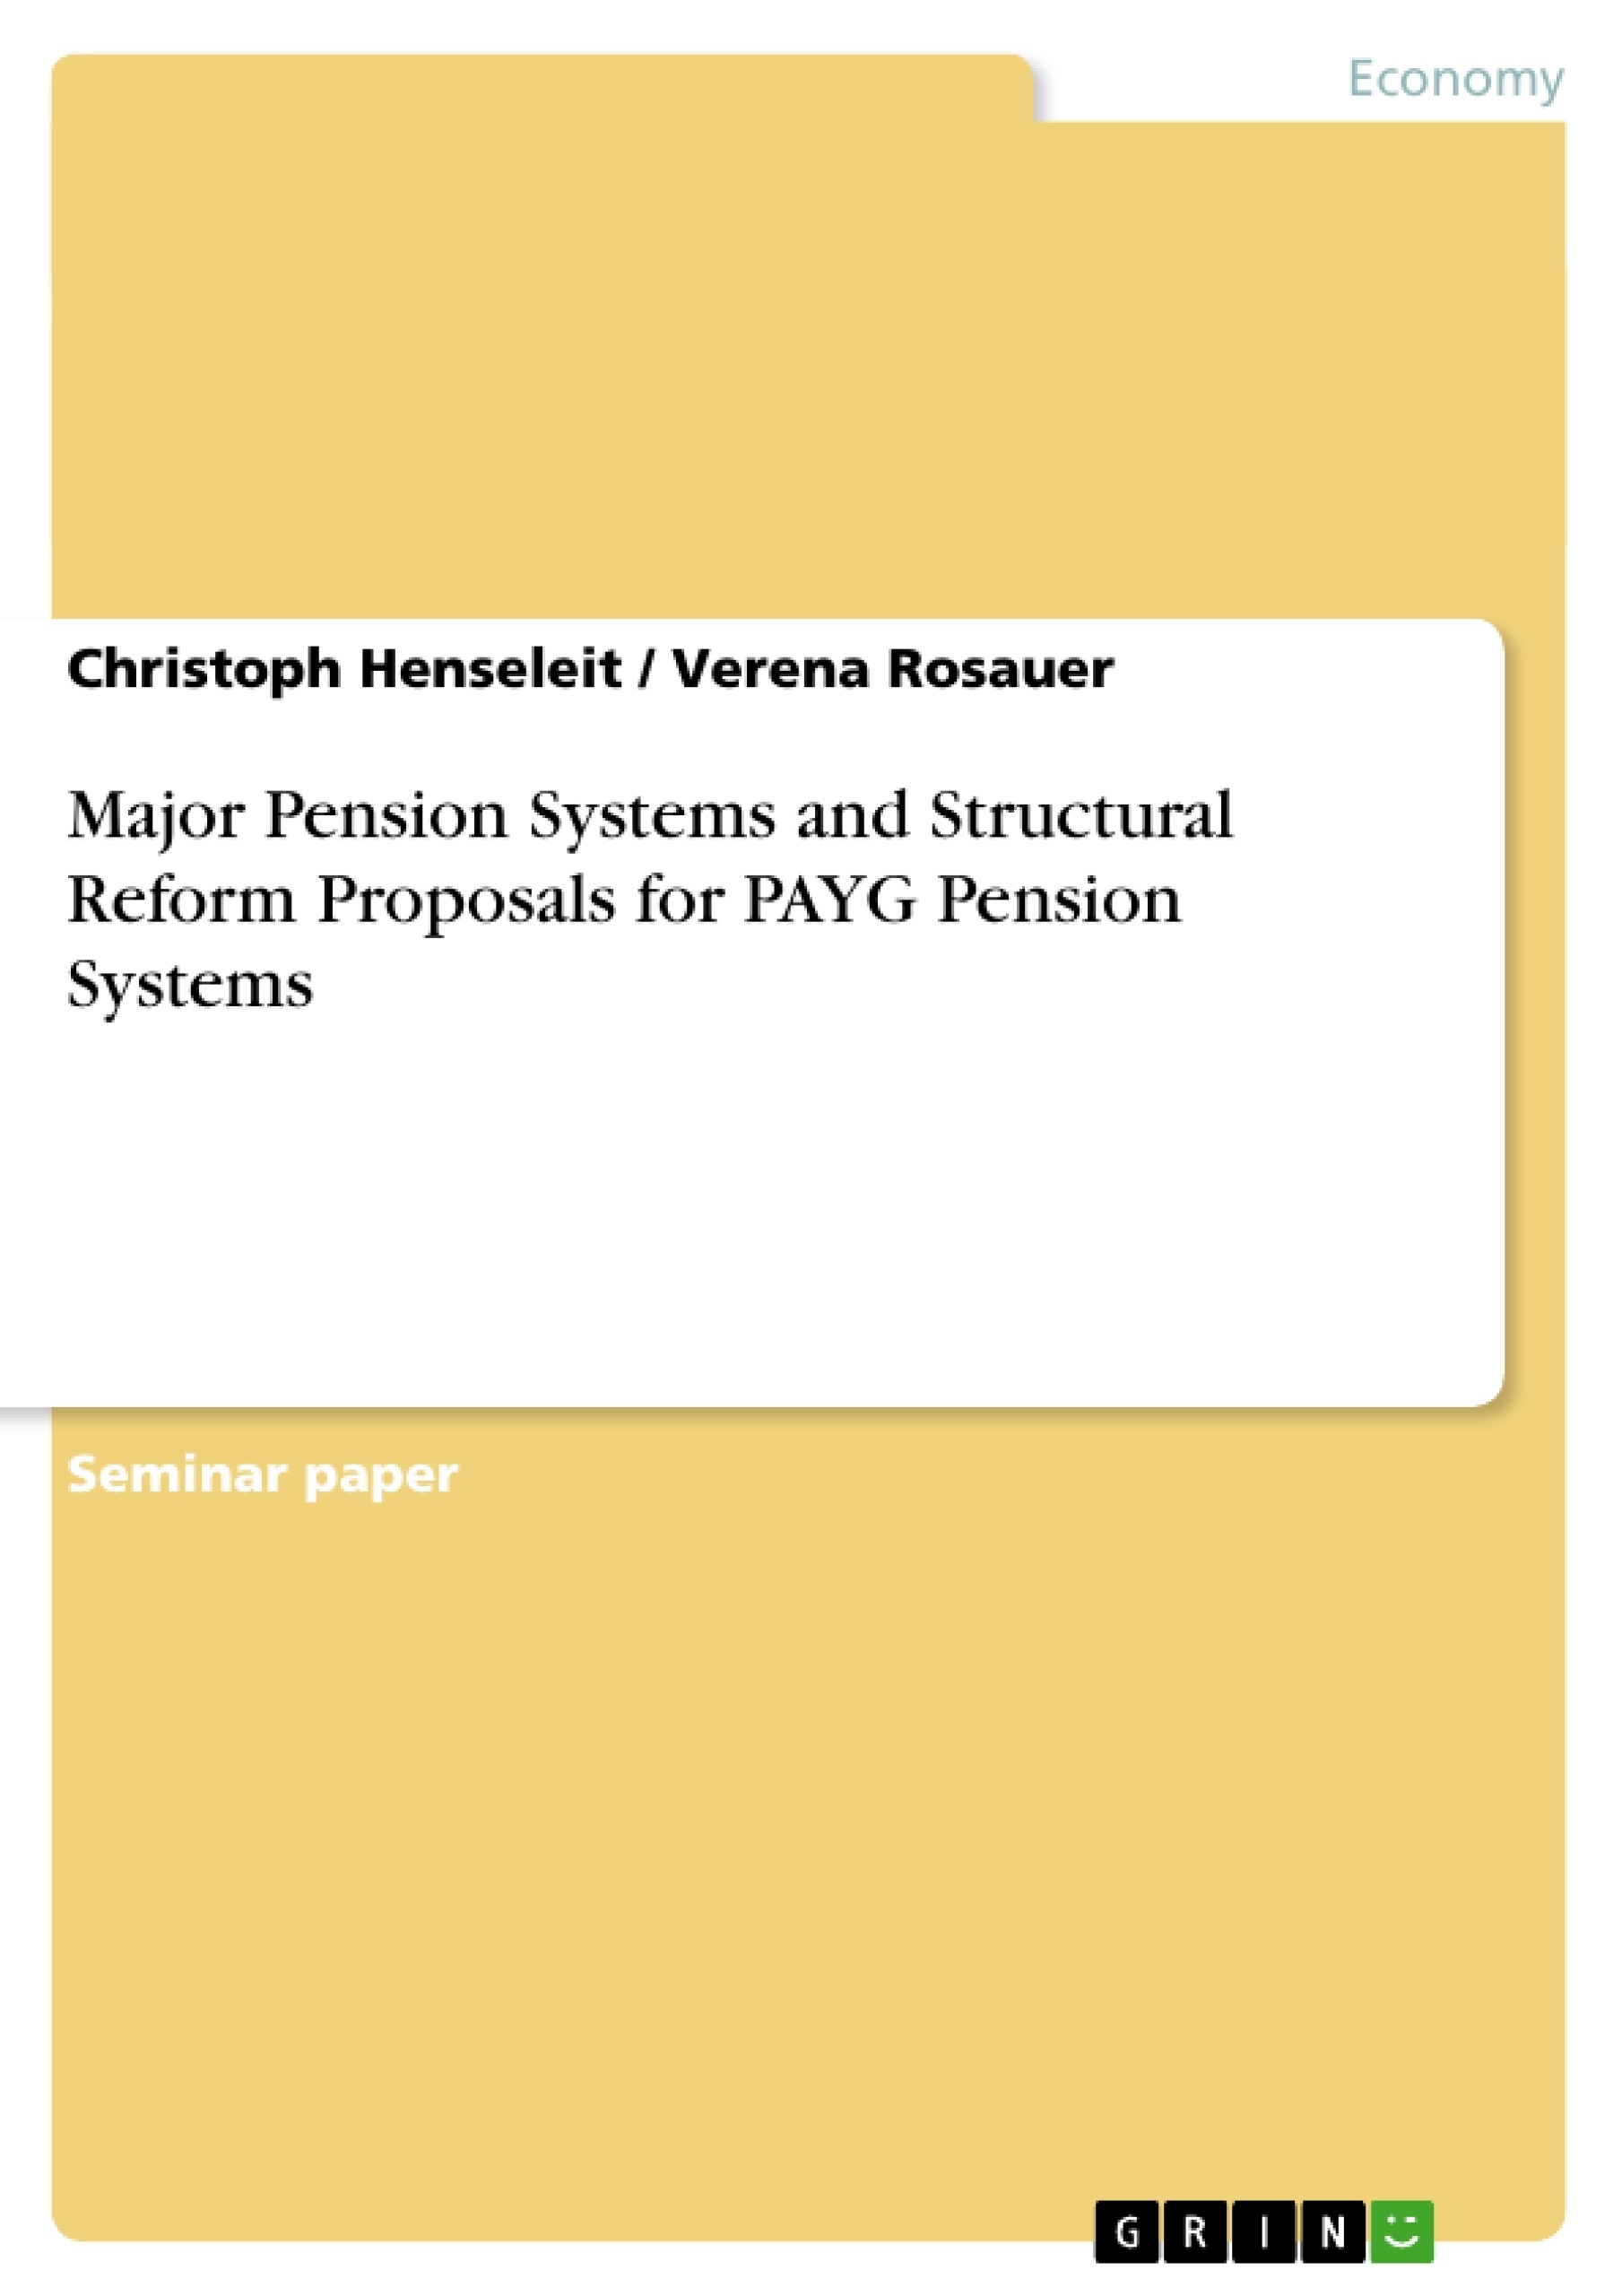 Título: Major Pension Systems and Structural Reform Proposals for PAYG Pension Systems